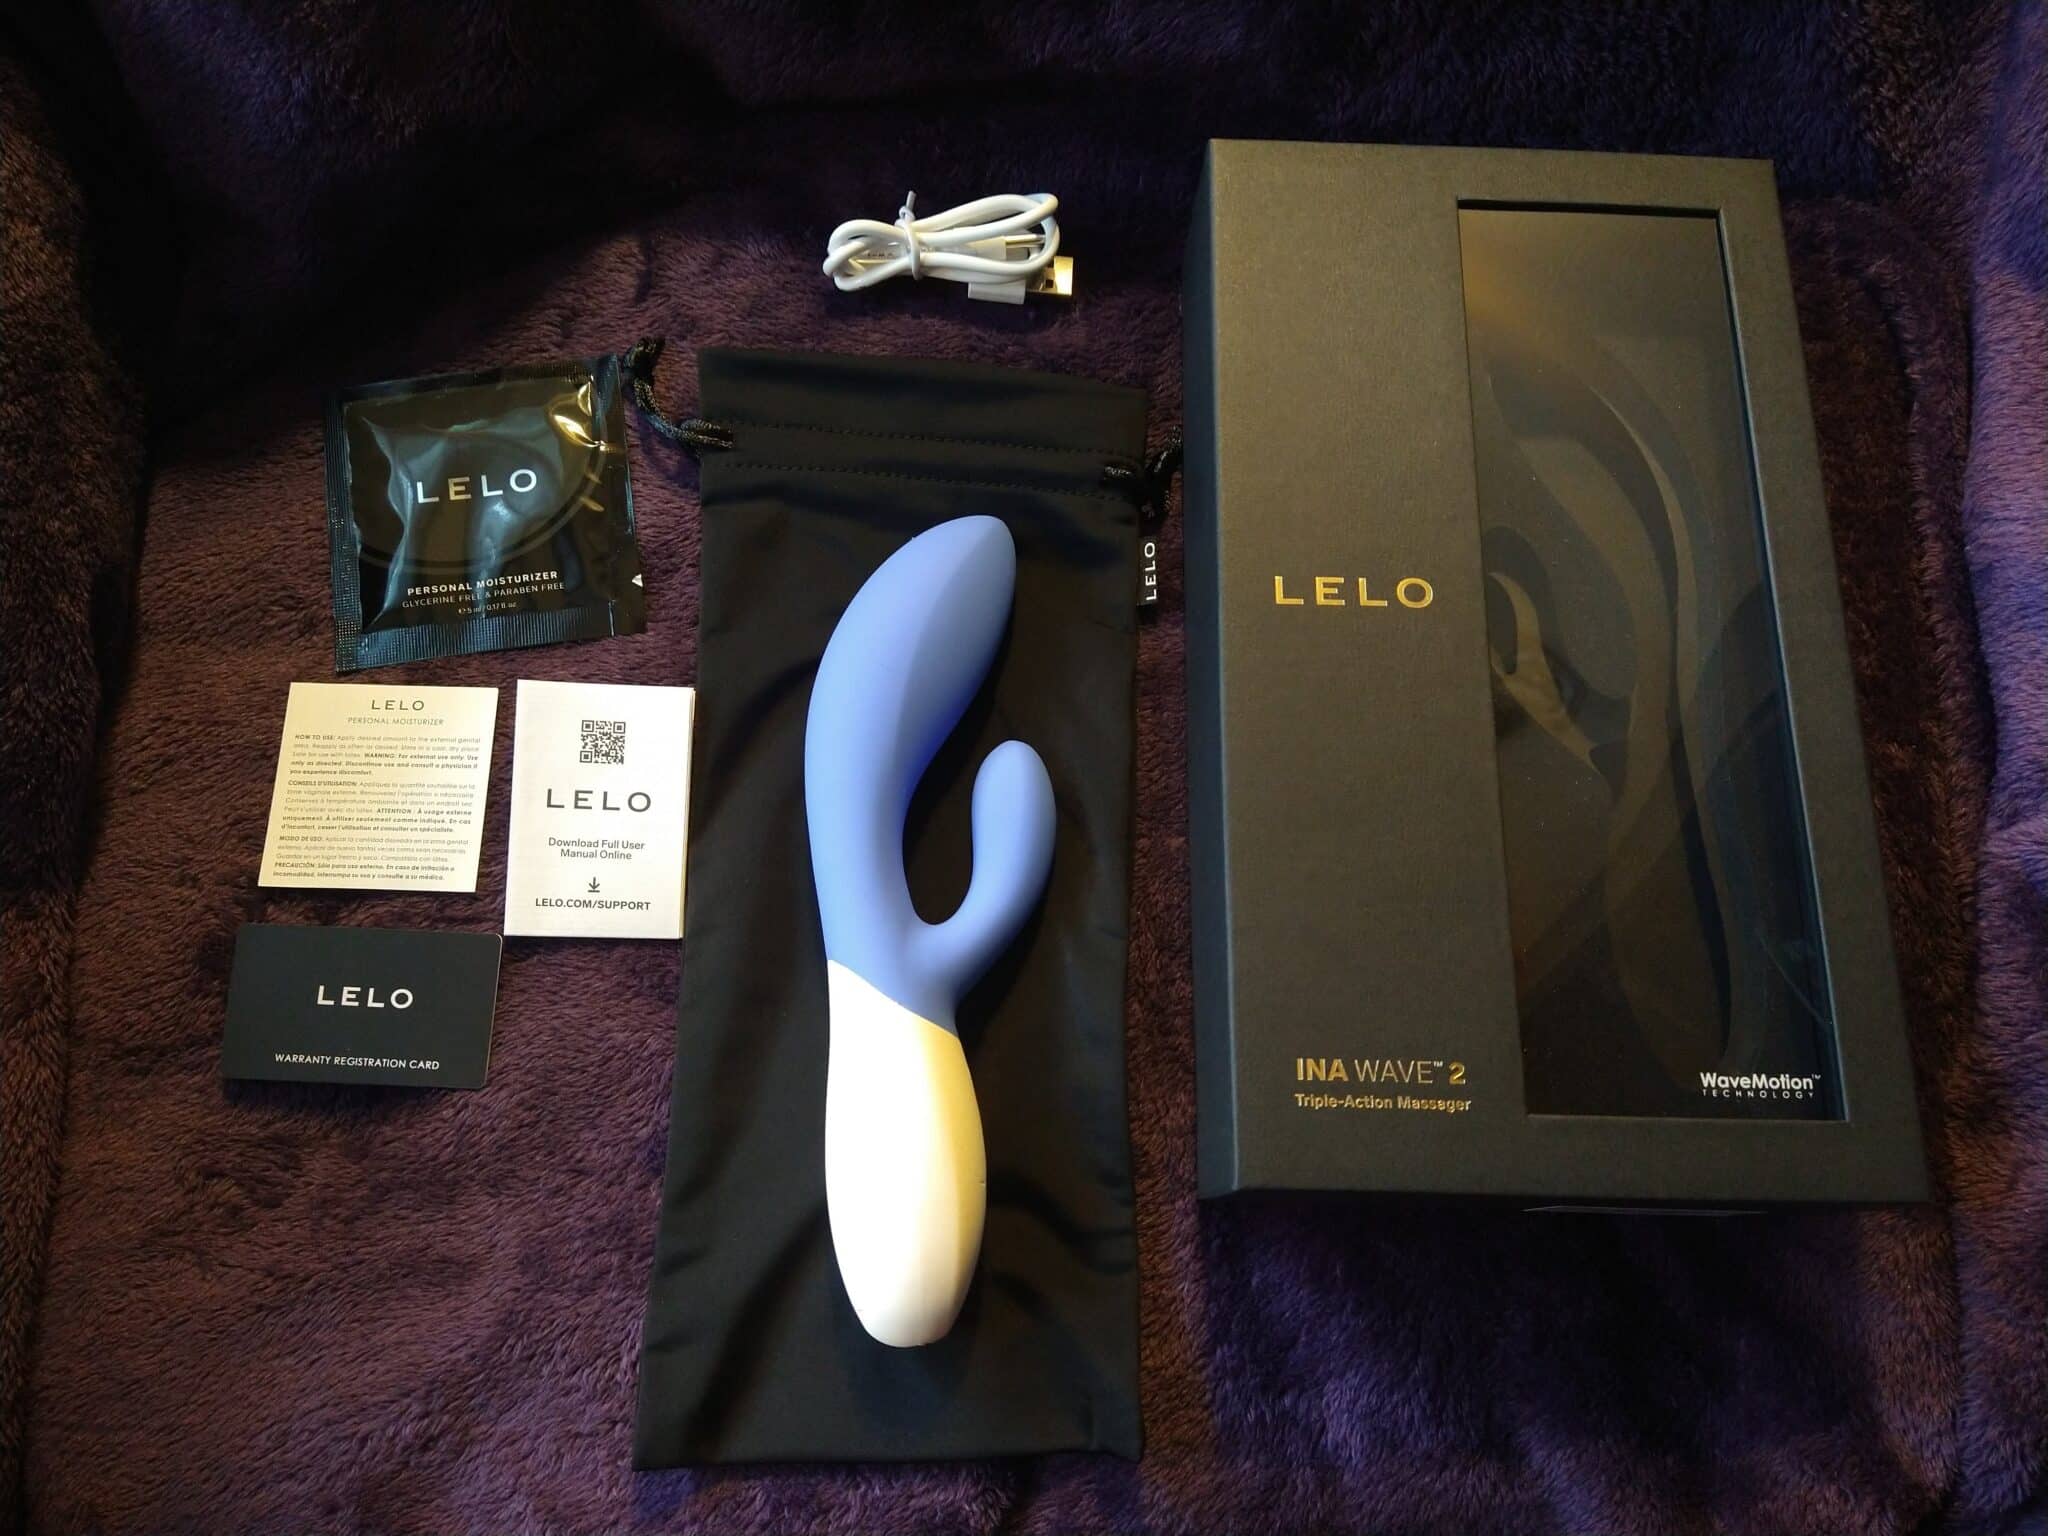 Lelo Ina Wave 2 Affordability Check: The Price of Lelo Ina Wave 2